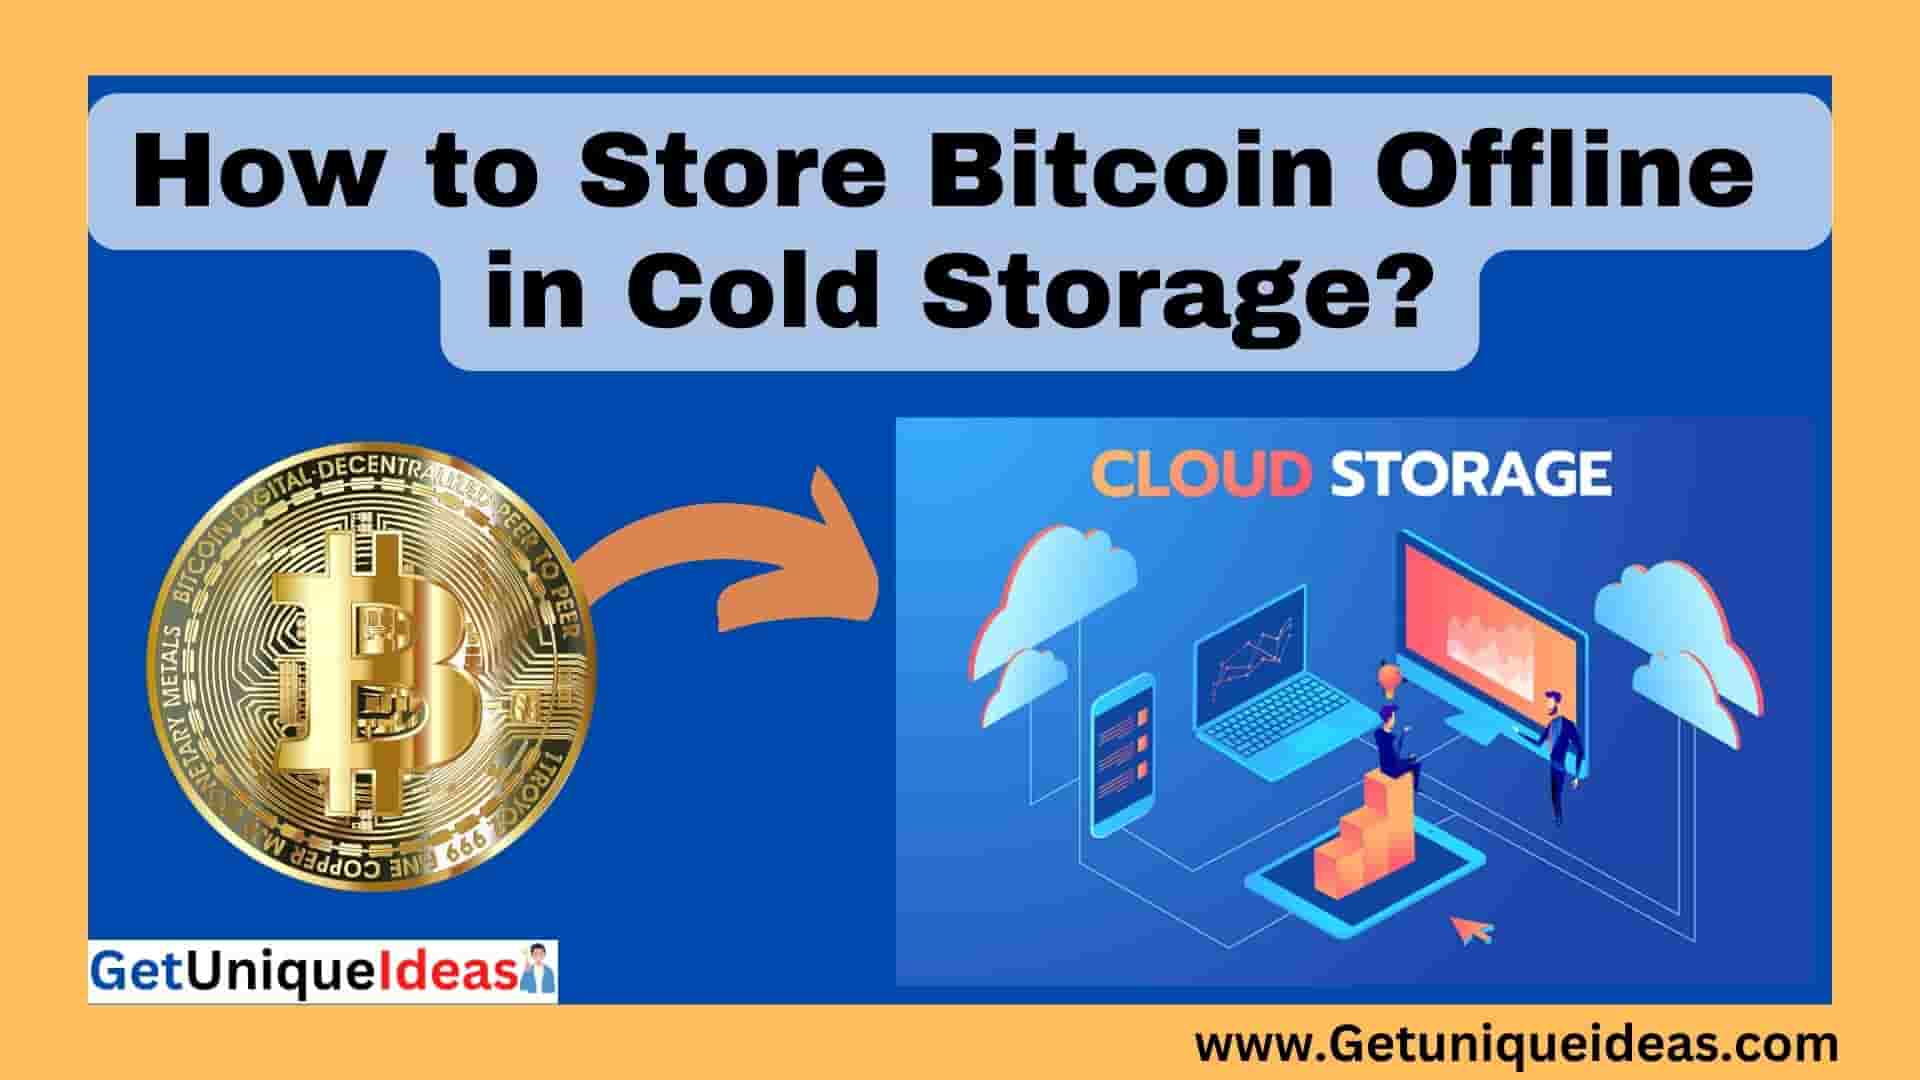 How to Store Bitcoin Offline in Cold Storage?